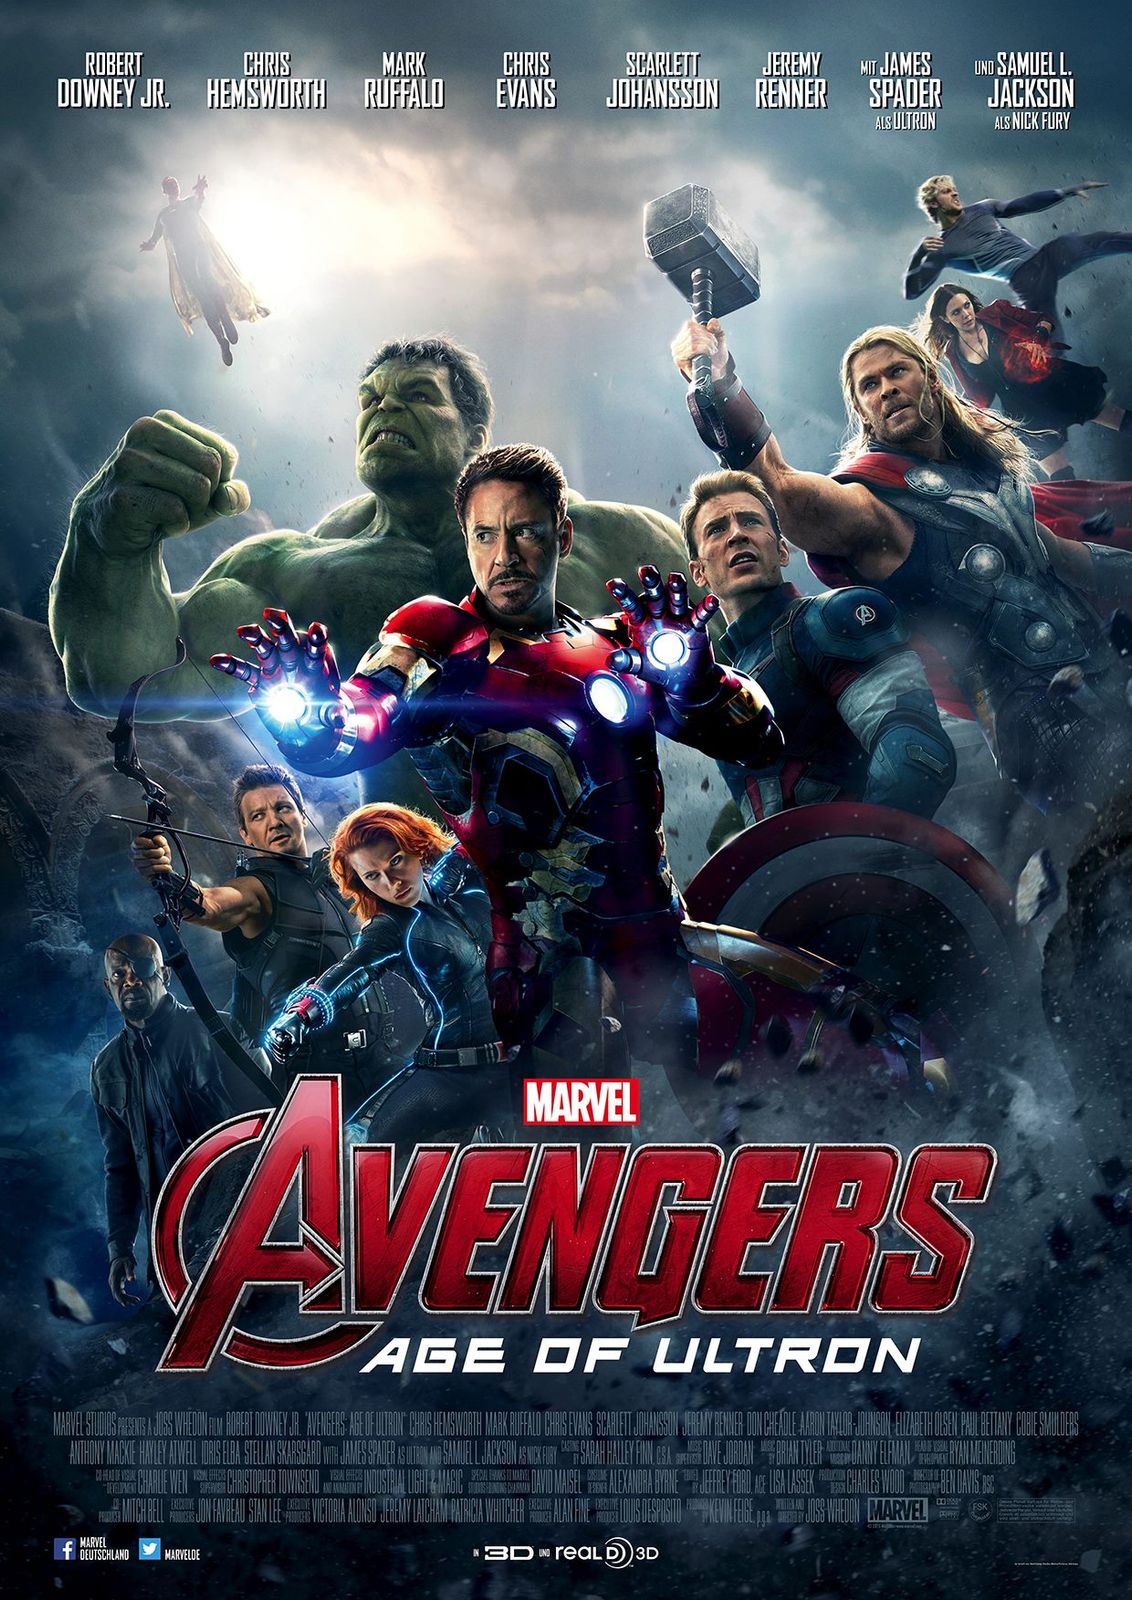 Avengers: Age of Ultron tops box office again